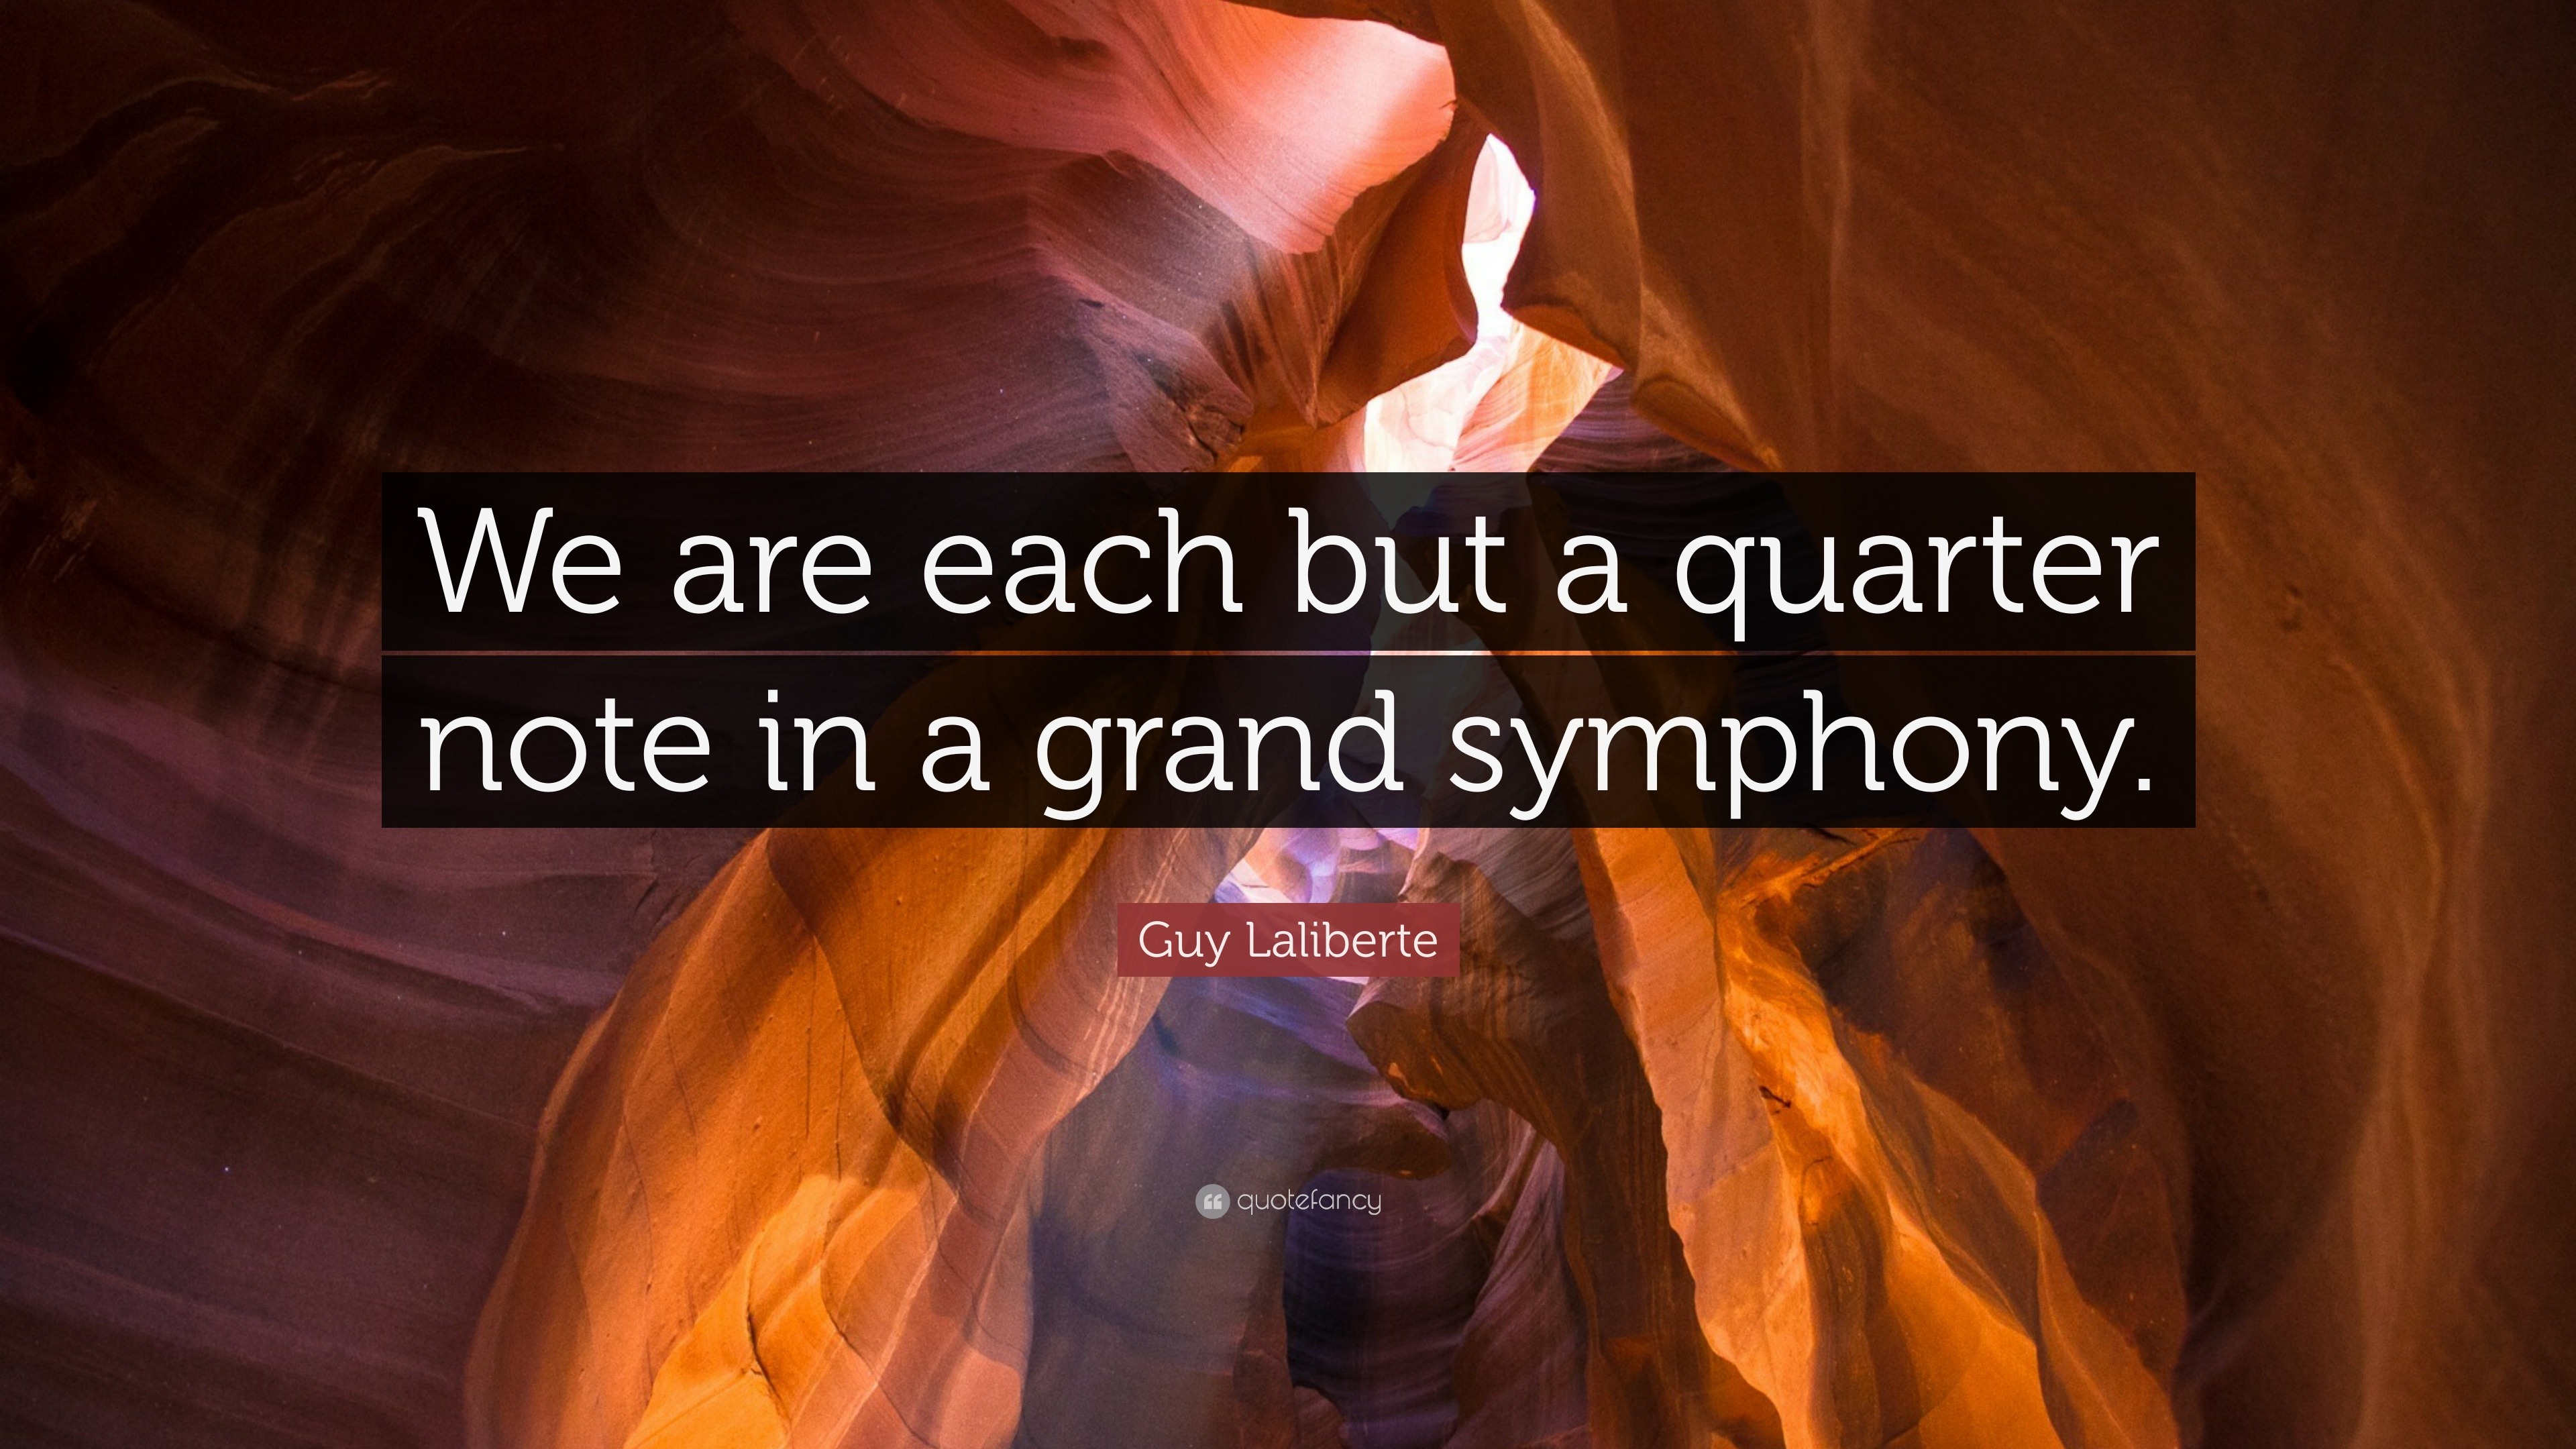 Guy Laliberte Quote: “We are each but a quarter note in a grand symphony.”